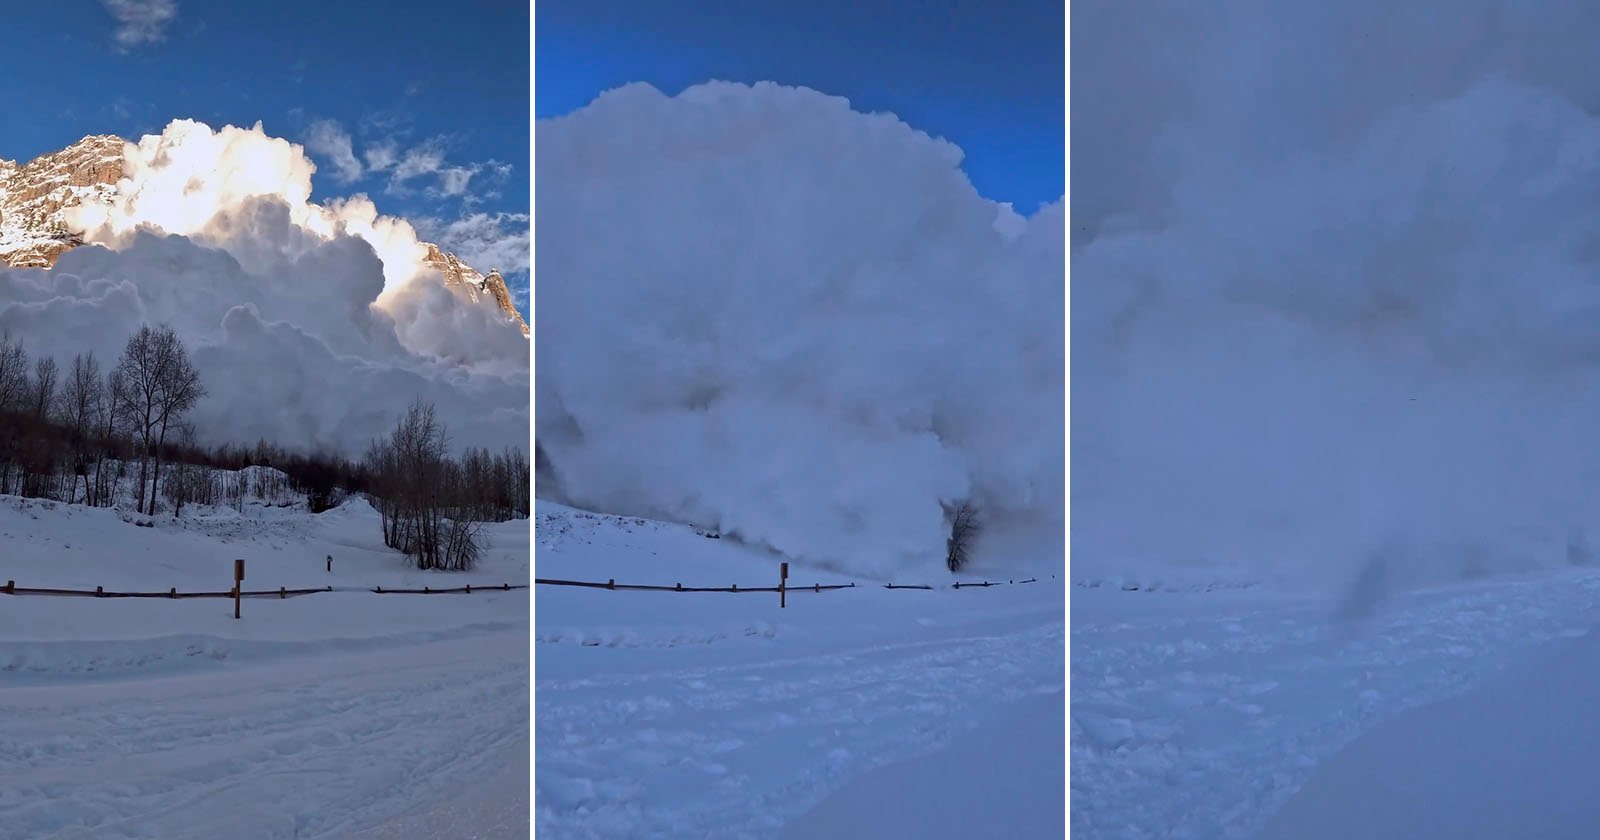 Watch the Insane Footage of an Avalanche Engulfing a GoPro